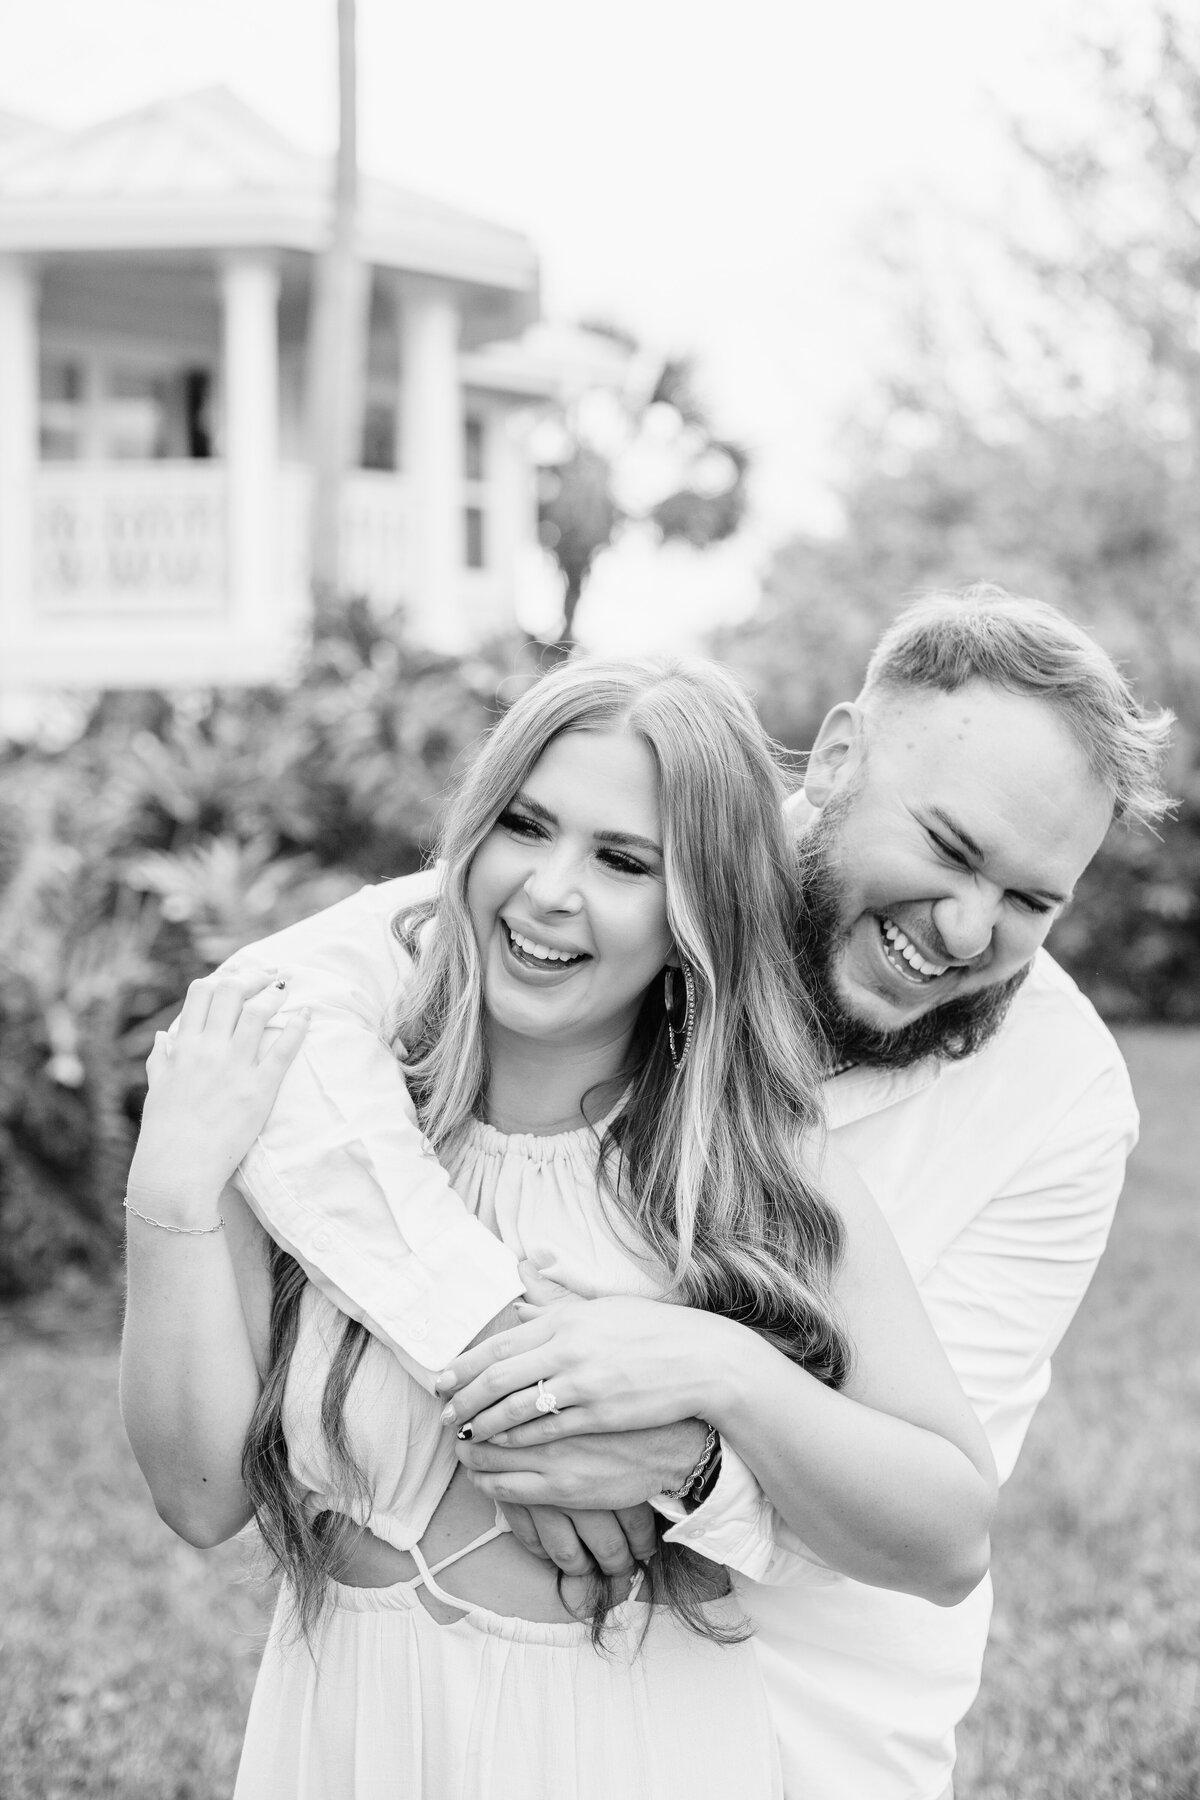 Playful couple during engagement photo shoot at Disney's Grand Floridian